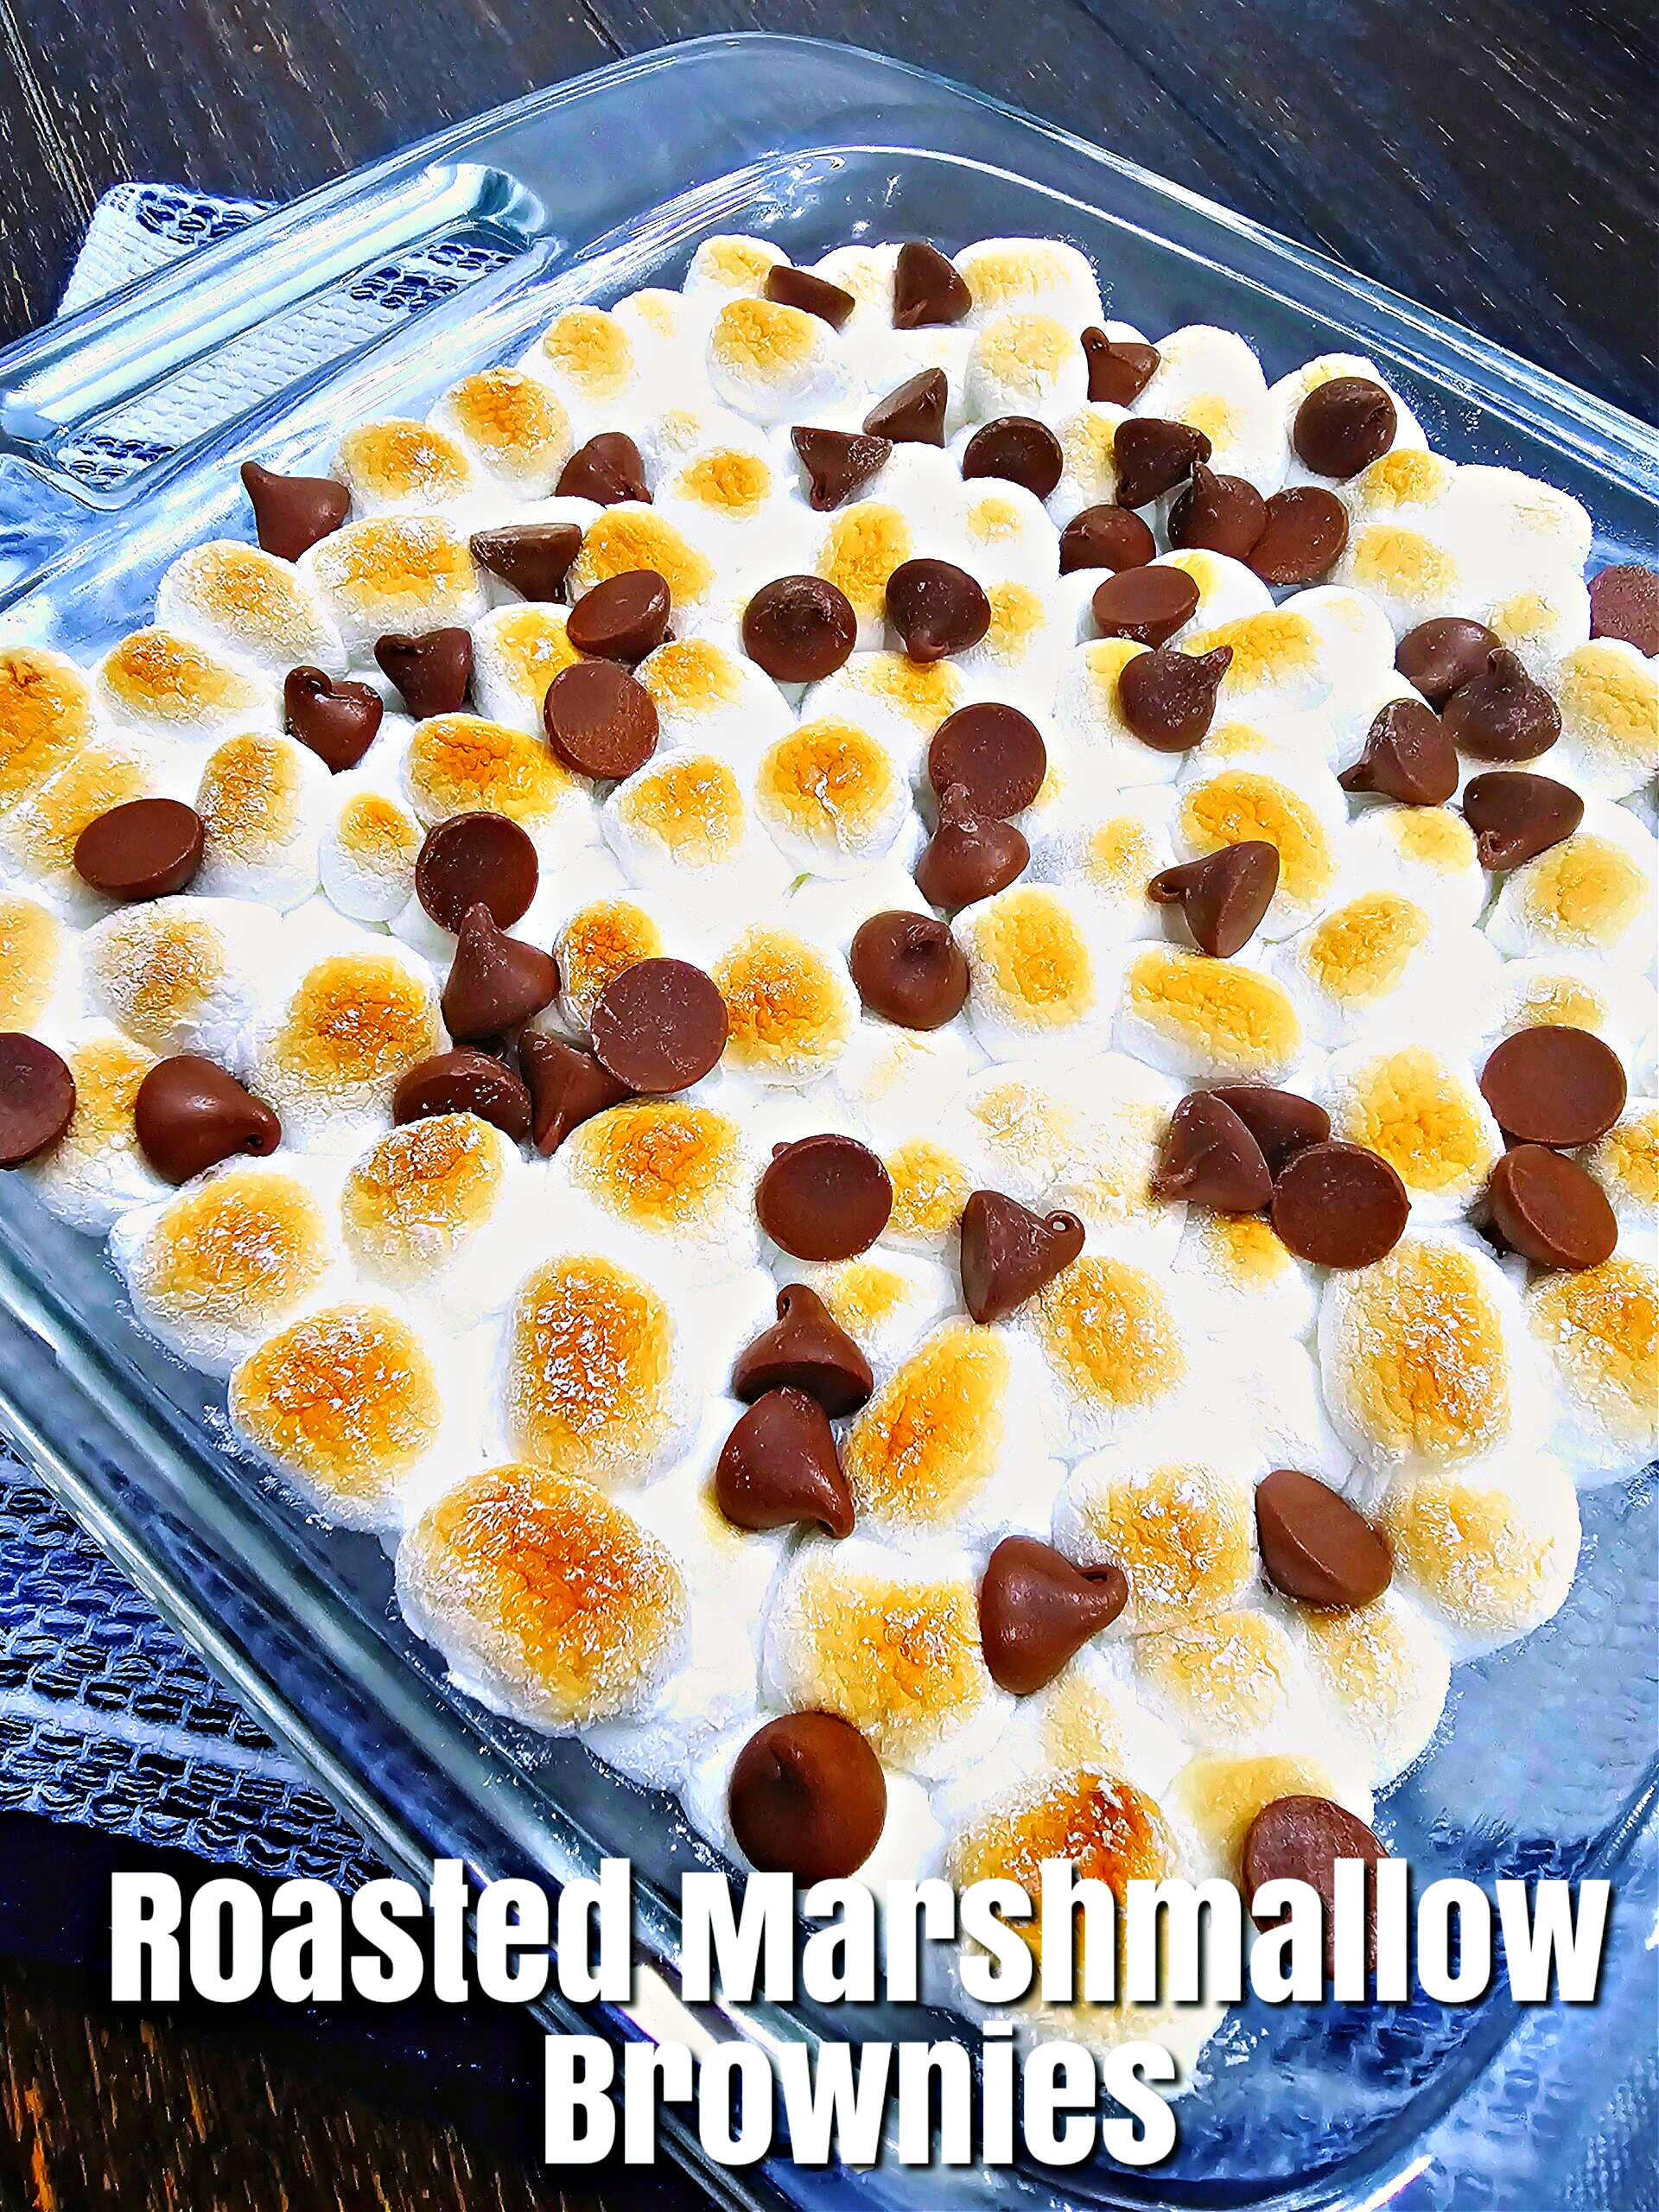 Roasted Marshmallow Brownies #brownies #marshmallows #chocolate #dessert #afterschoolsnack #partyfoodideas #yum